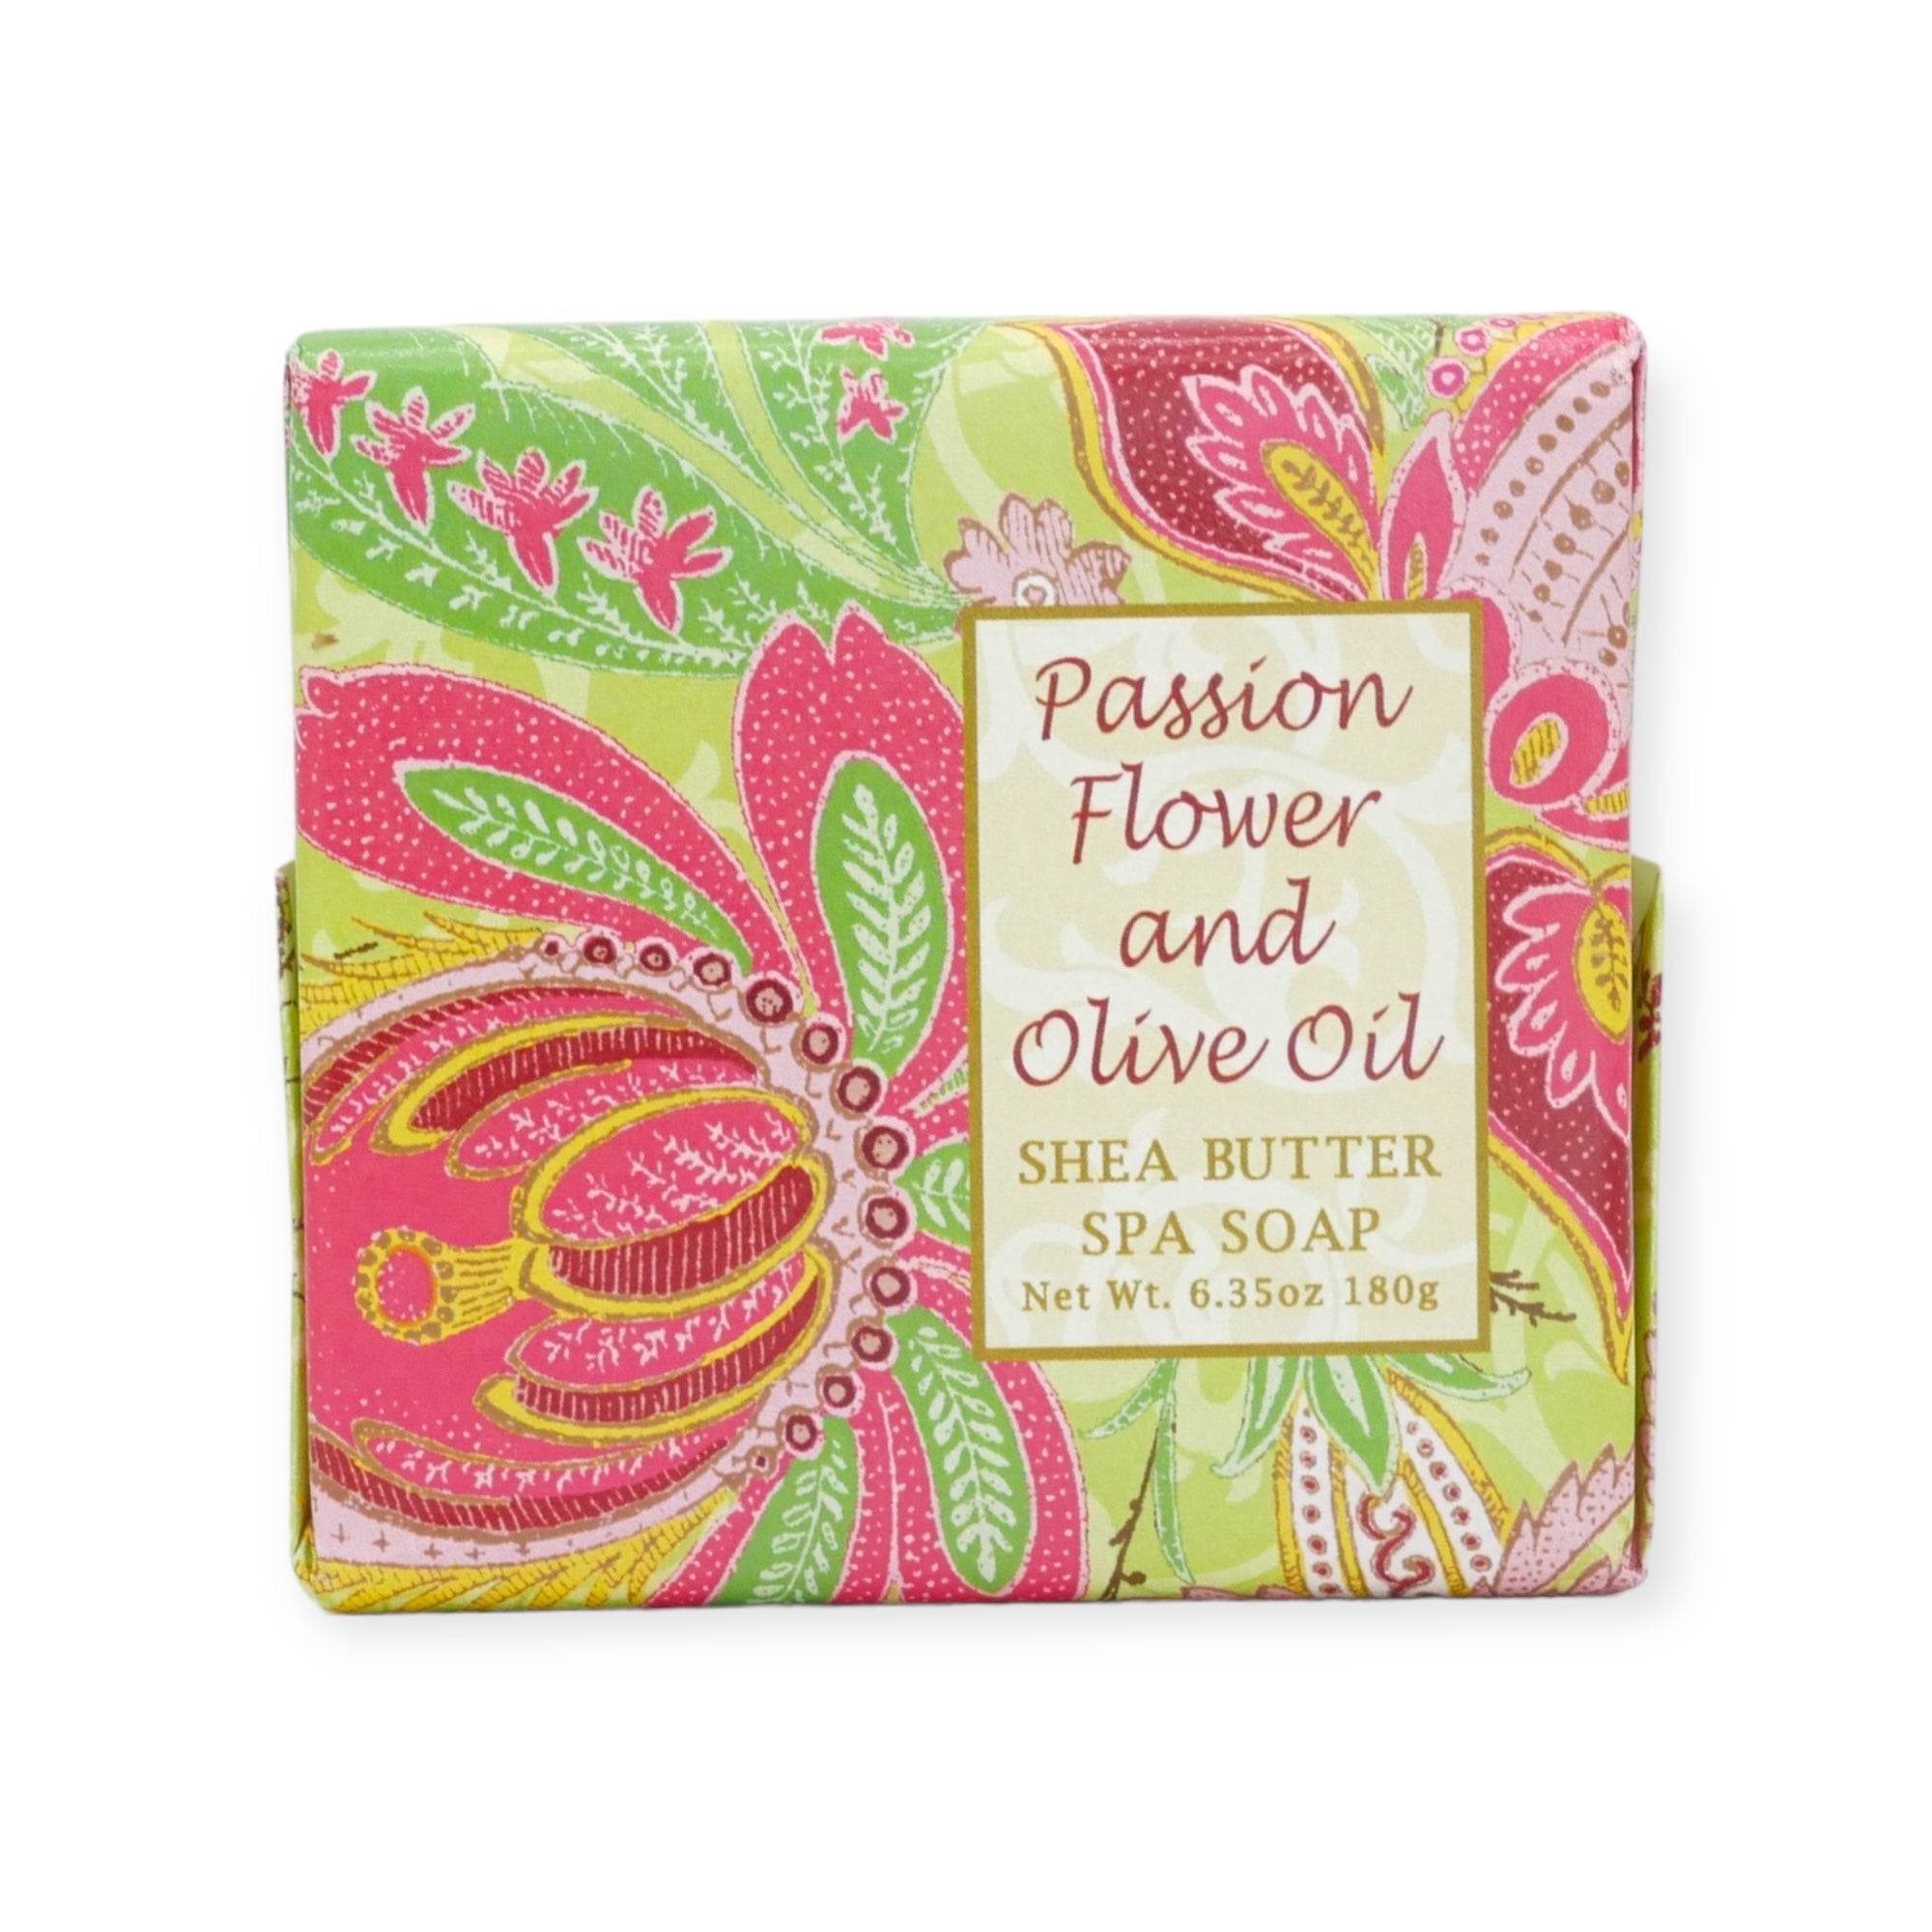 Passion Flower & Olive Oil Shea Butter Spa Soap by Greenwich Bay Trading Co.